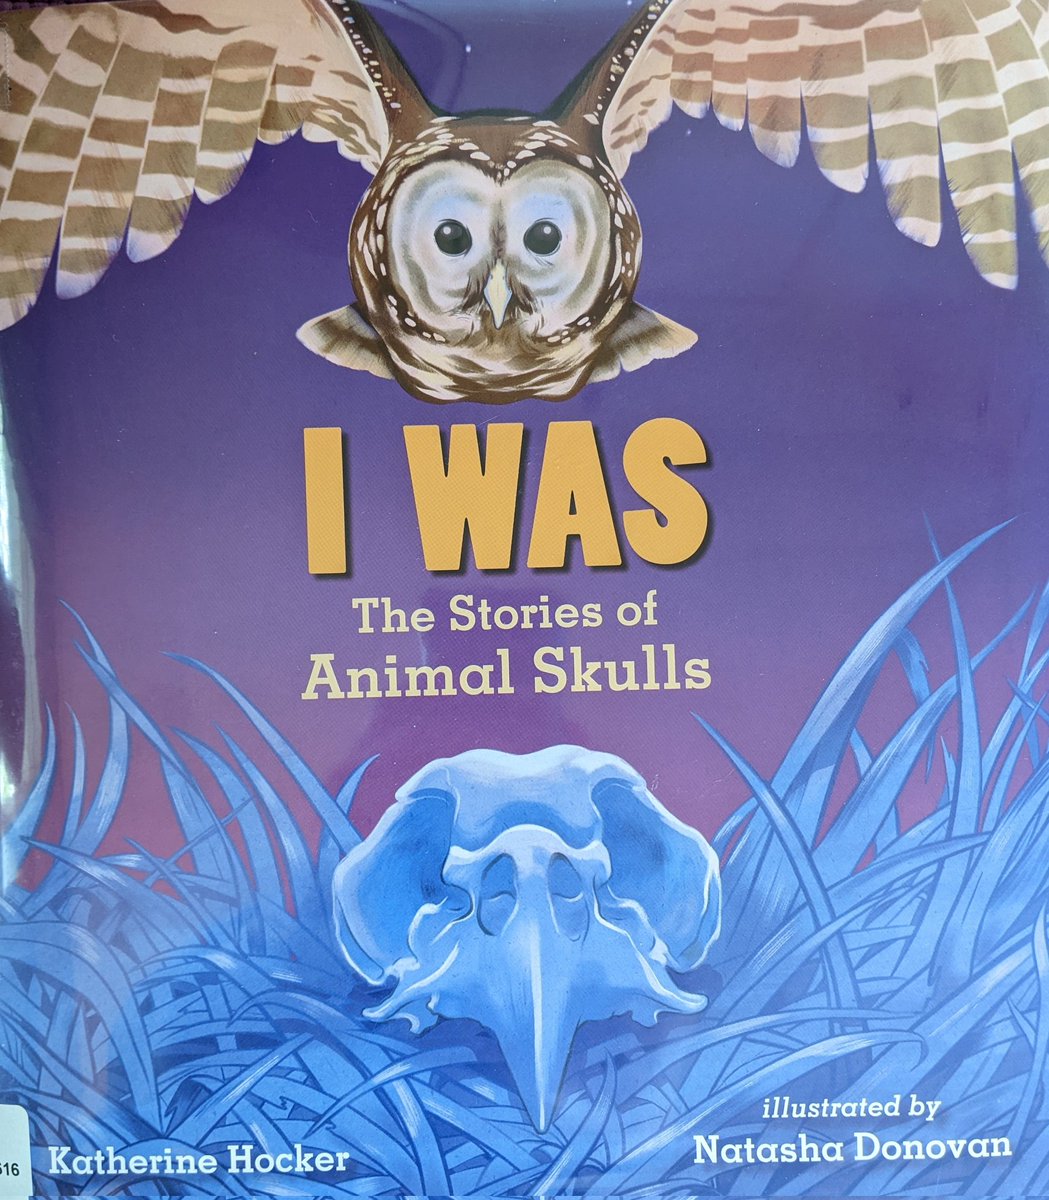 Such a fantastic #nonfiction #STEM #picturebook !! Beautifully written and illustrated. Encourages readers to be curious about the natural world and how we're all connected. Well done, Katherine Hocker and Natasha Donovan! #kidlit